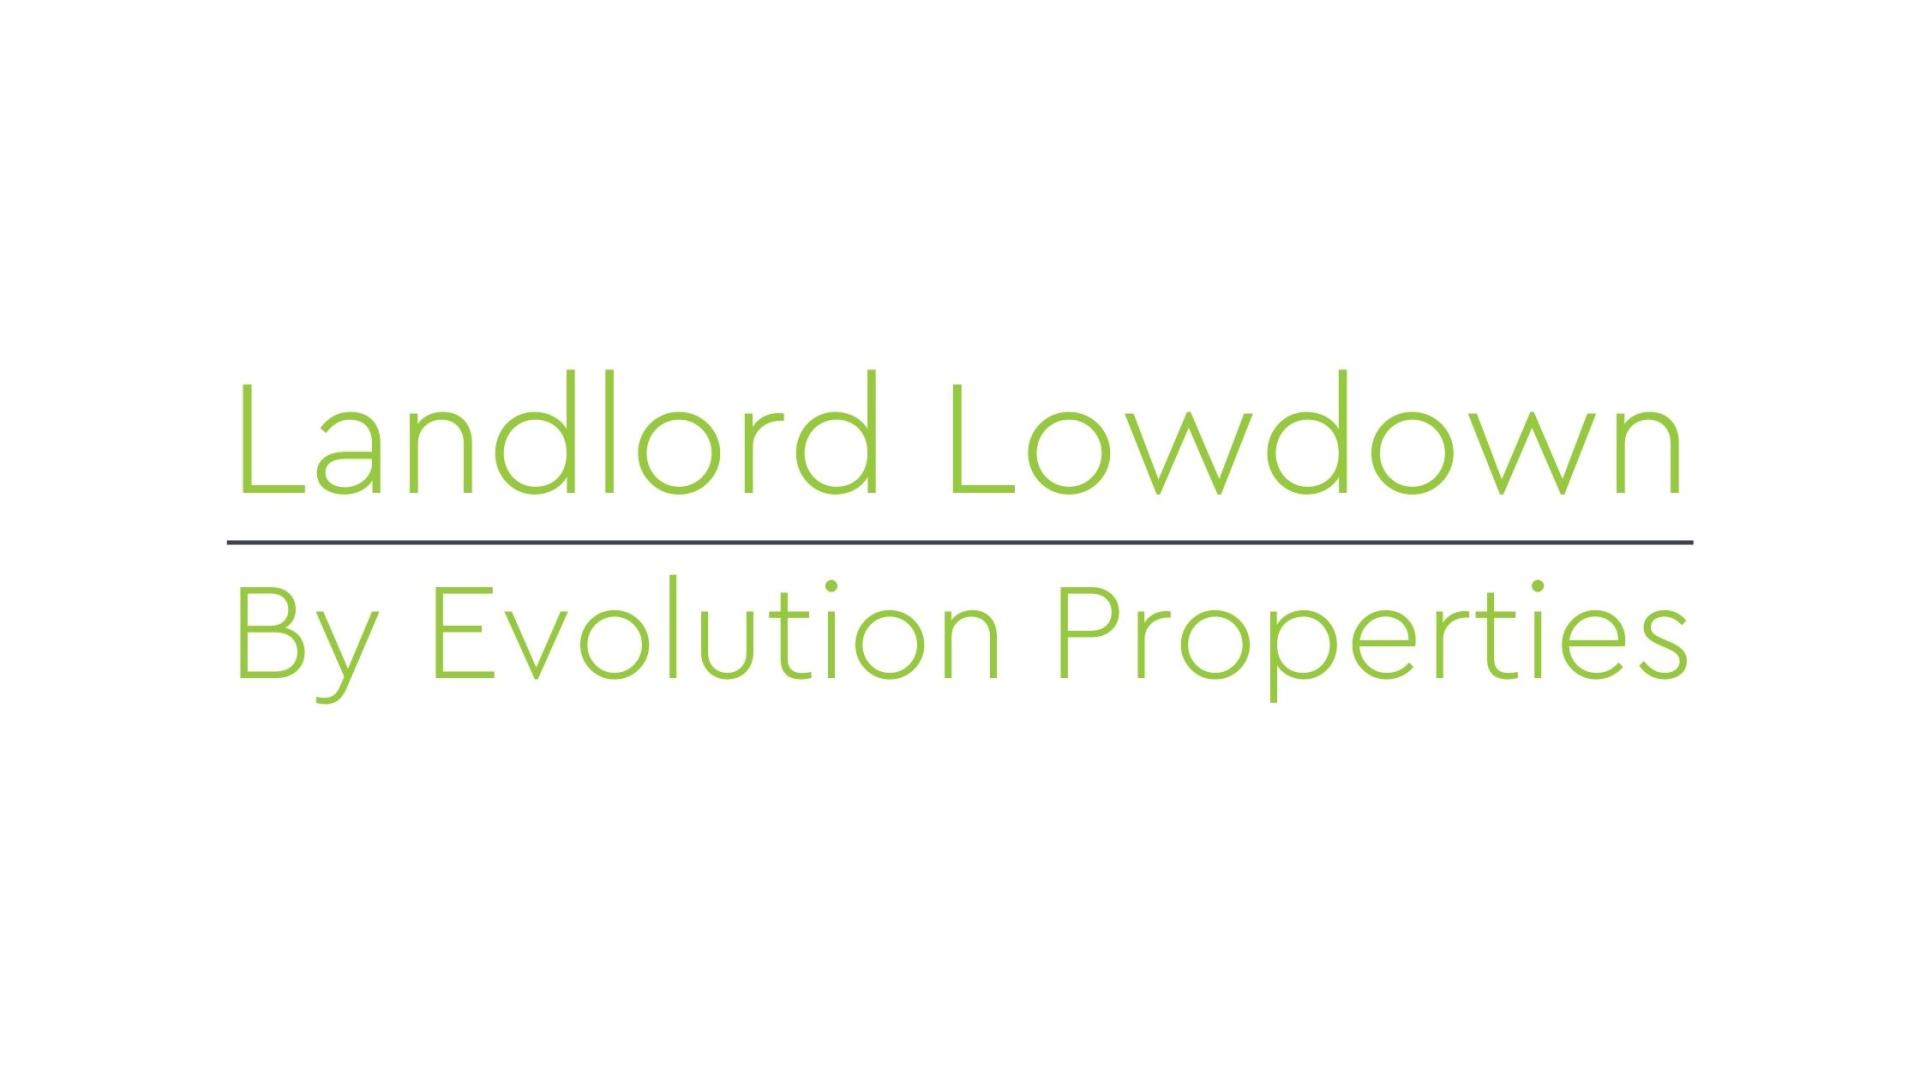 Landlord Lowdown - Interest and Inflation Rates